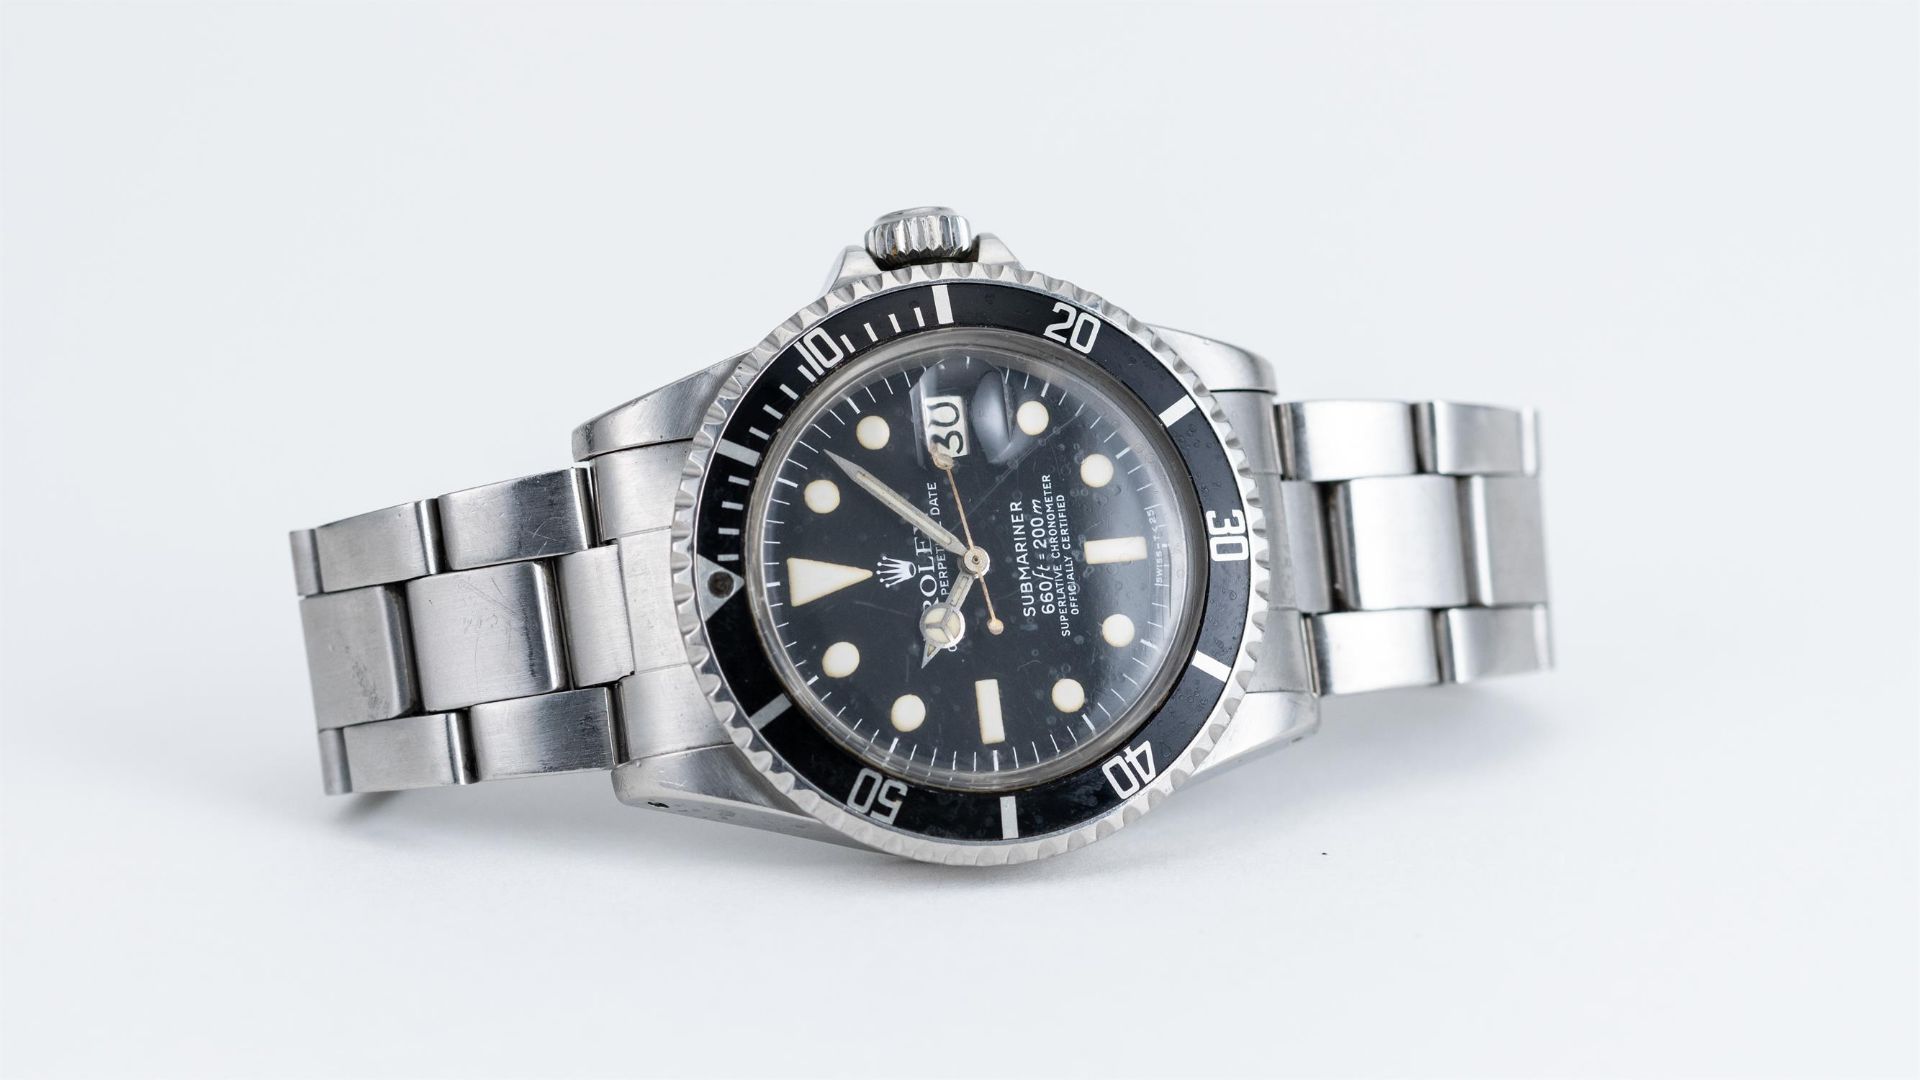 1978 Rolex Submariner Date 1680 Automatic - Image 2 of 3